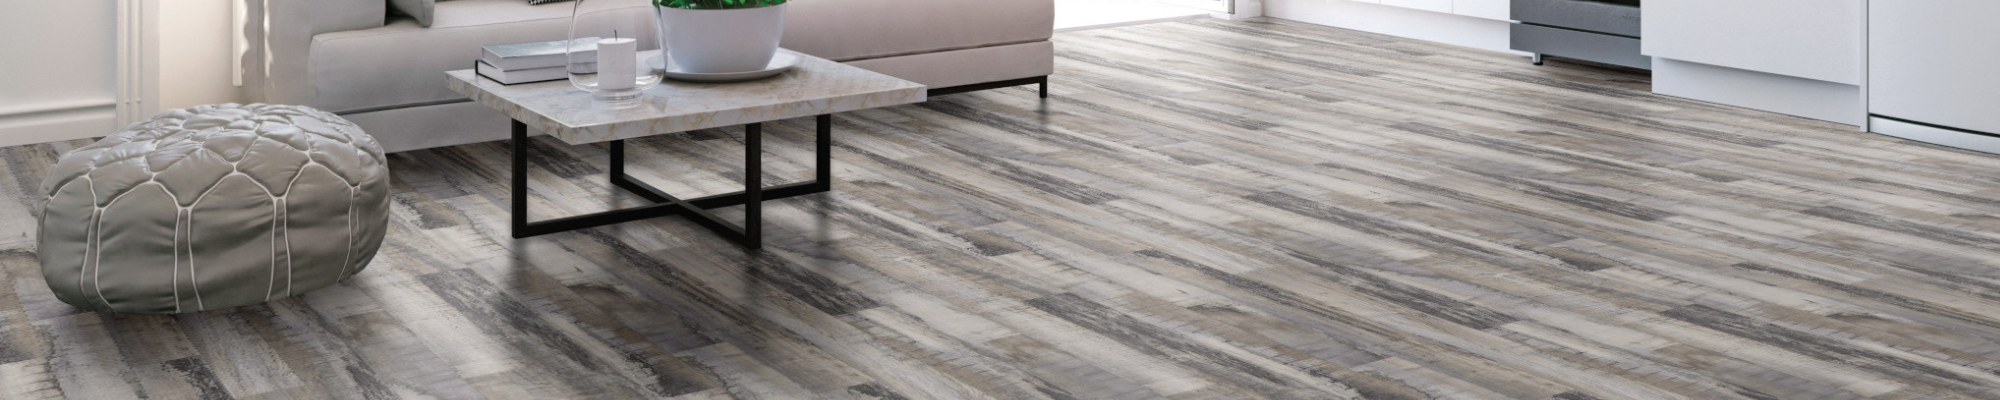 Vinyl Flooring Articles For Tips, Tricks And Solutions. Provided By Shaw Floors & Carpet City Inc